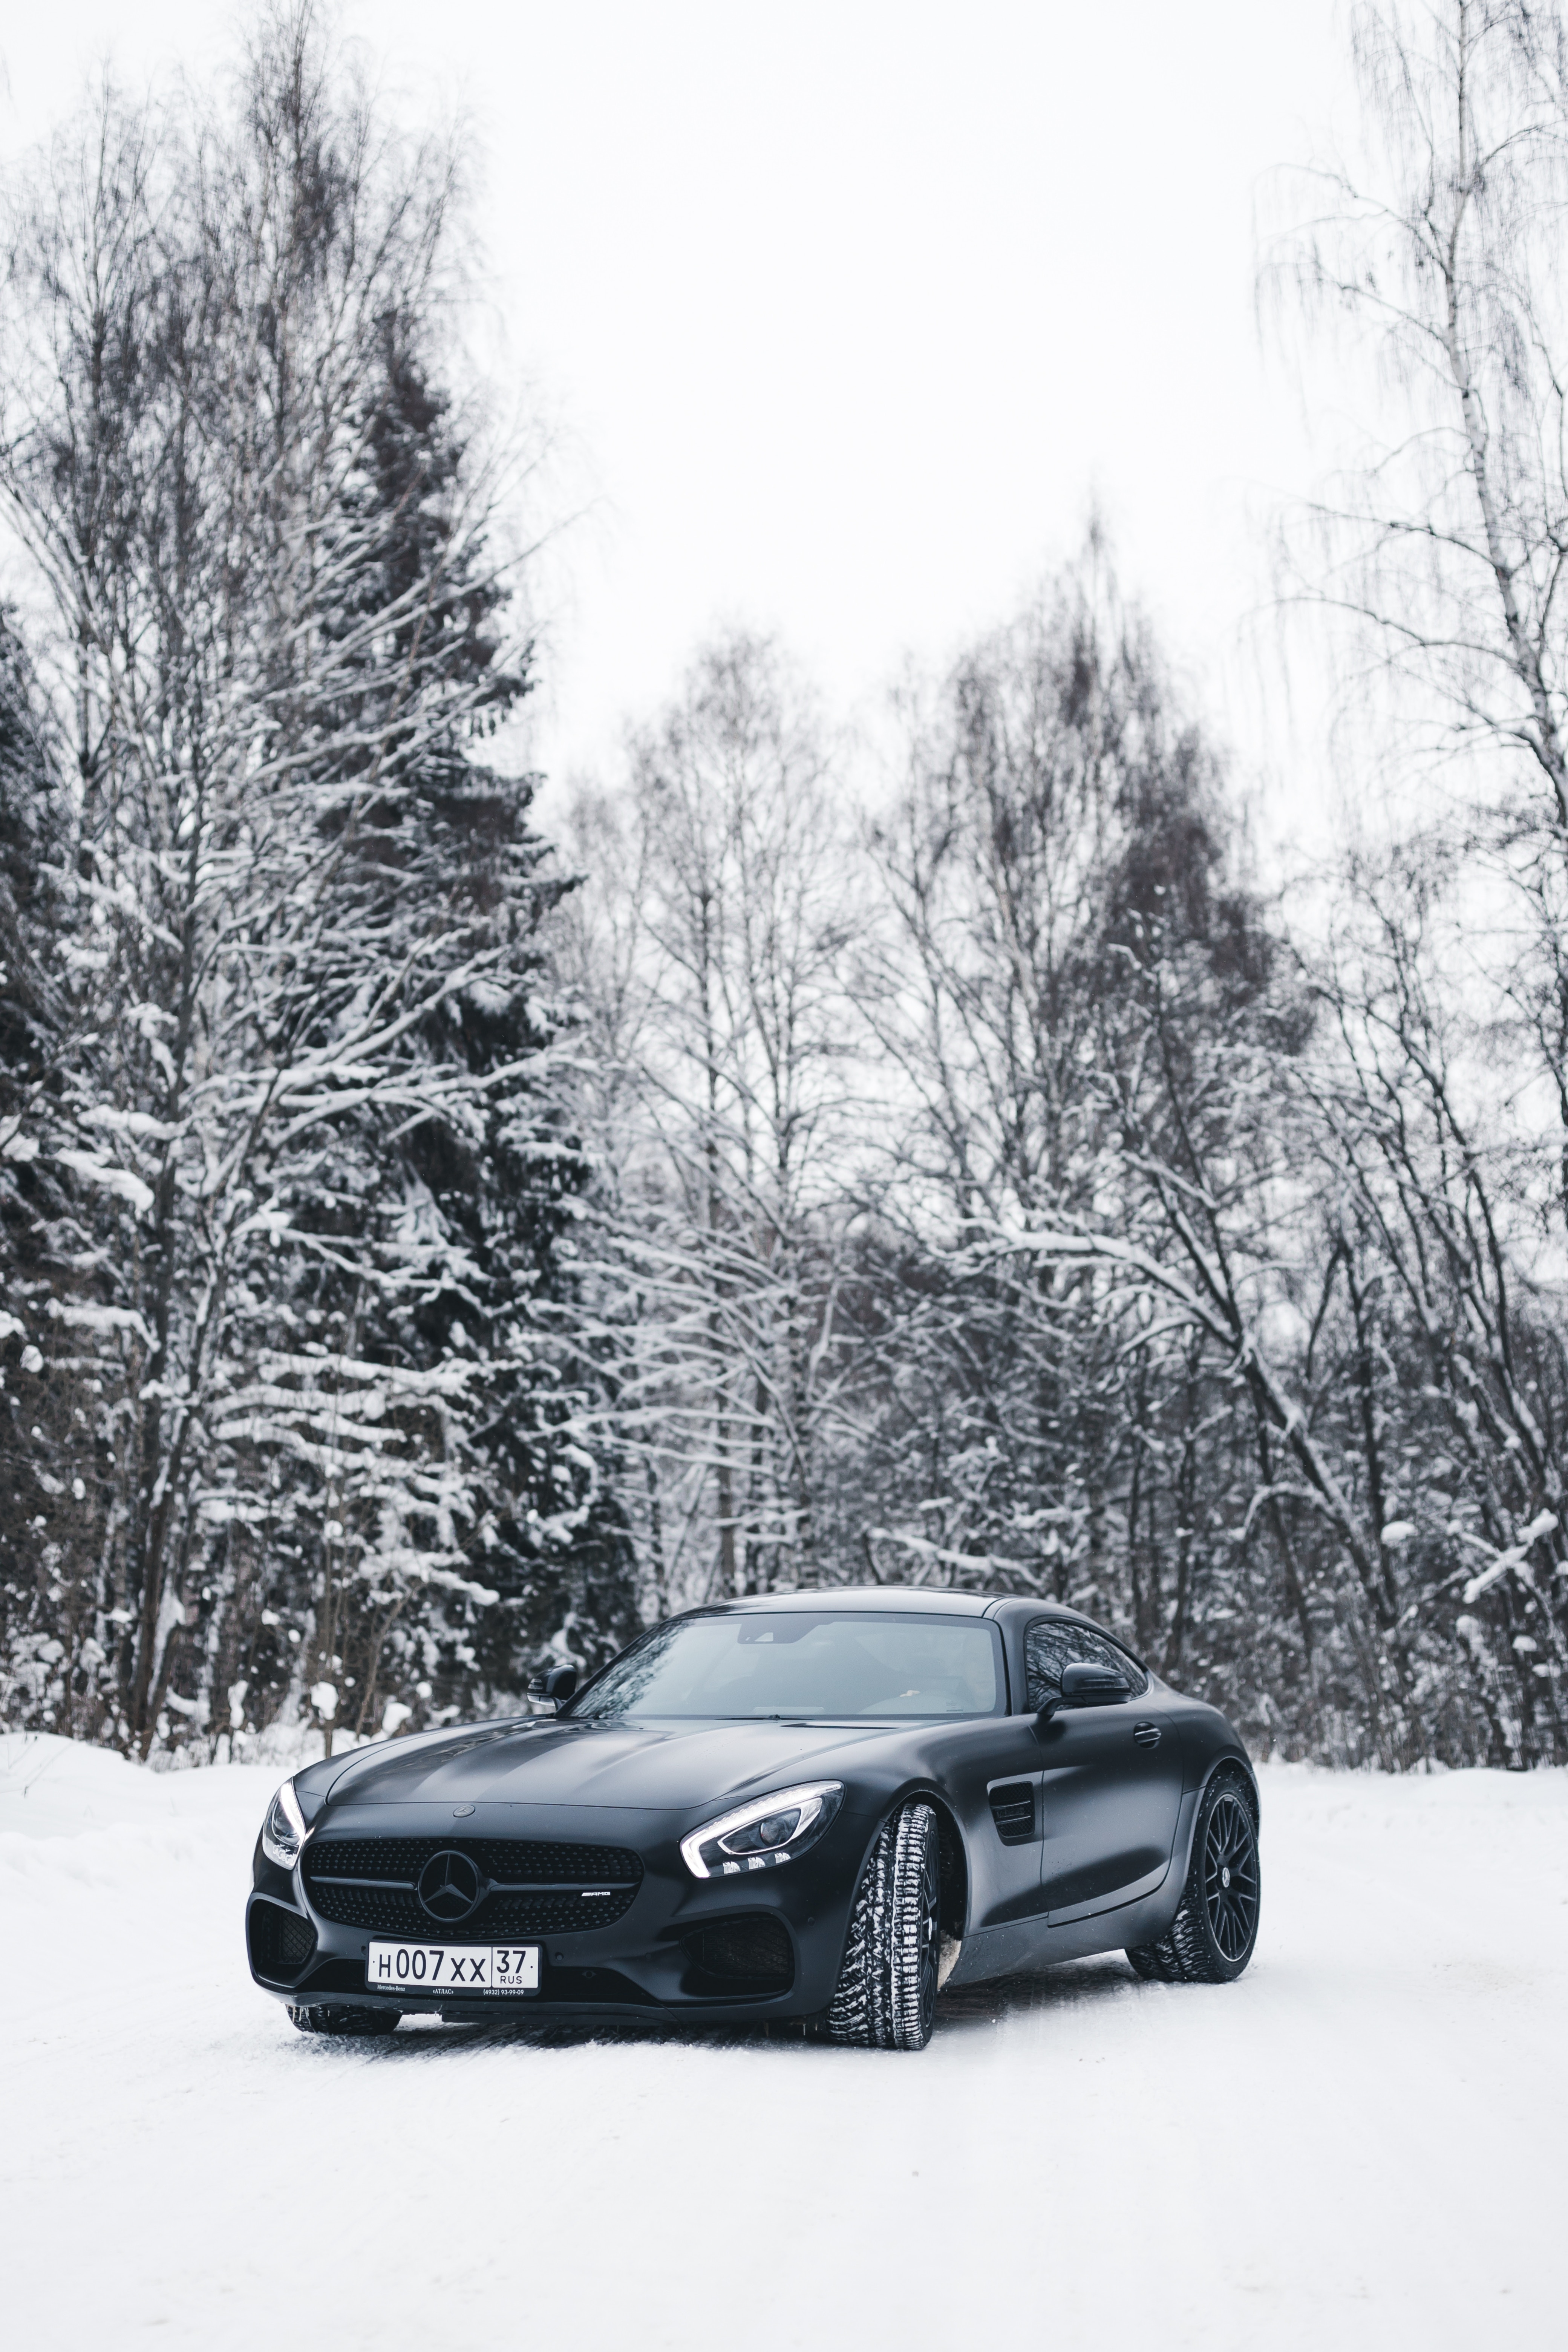 android cars, mercedes benz, mercedes, black, forest, snow